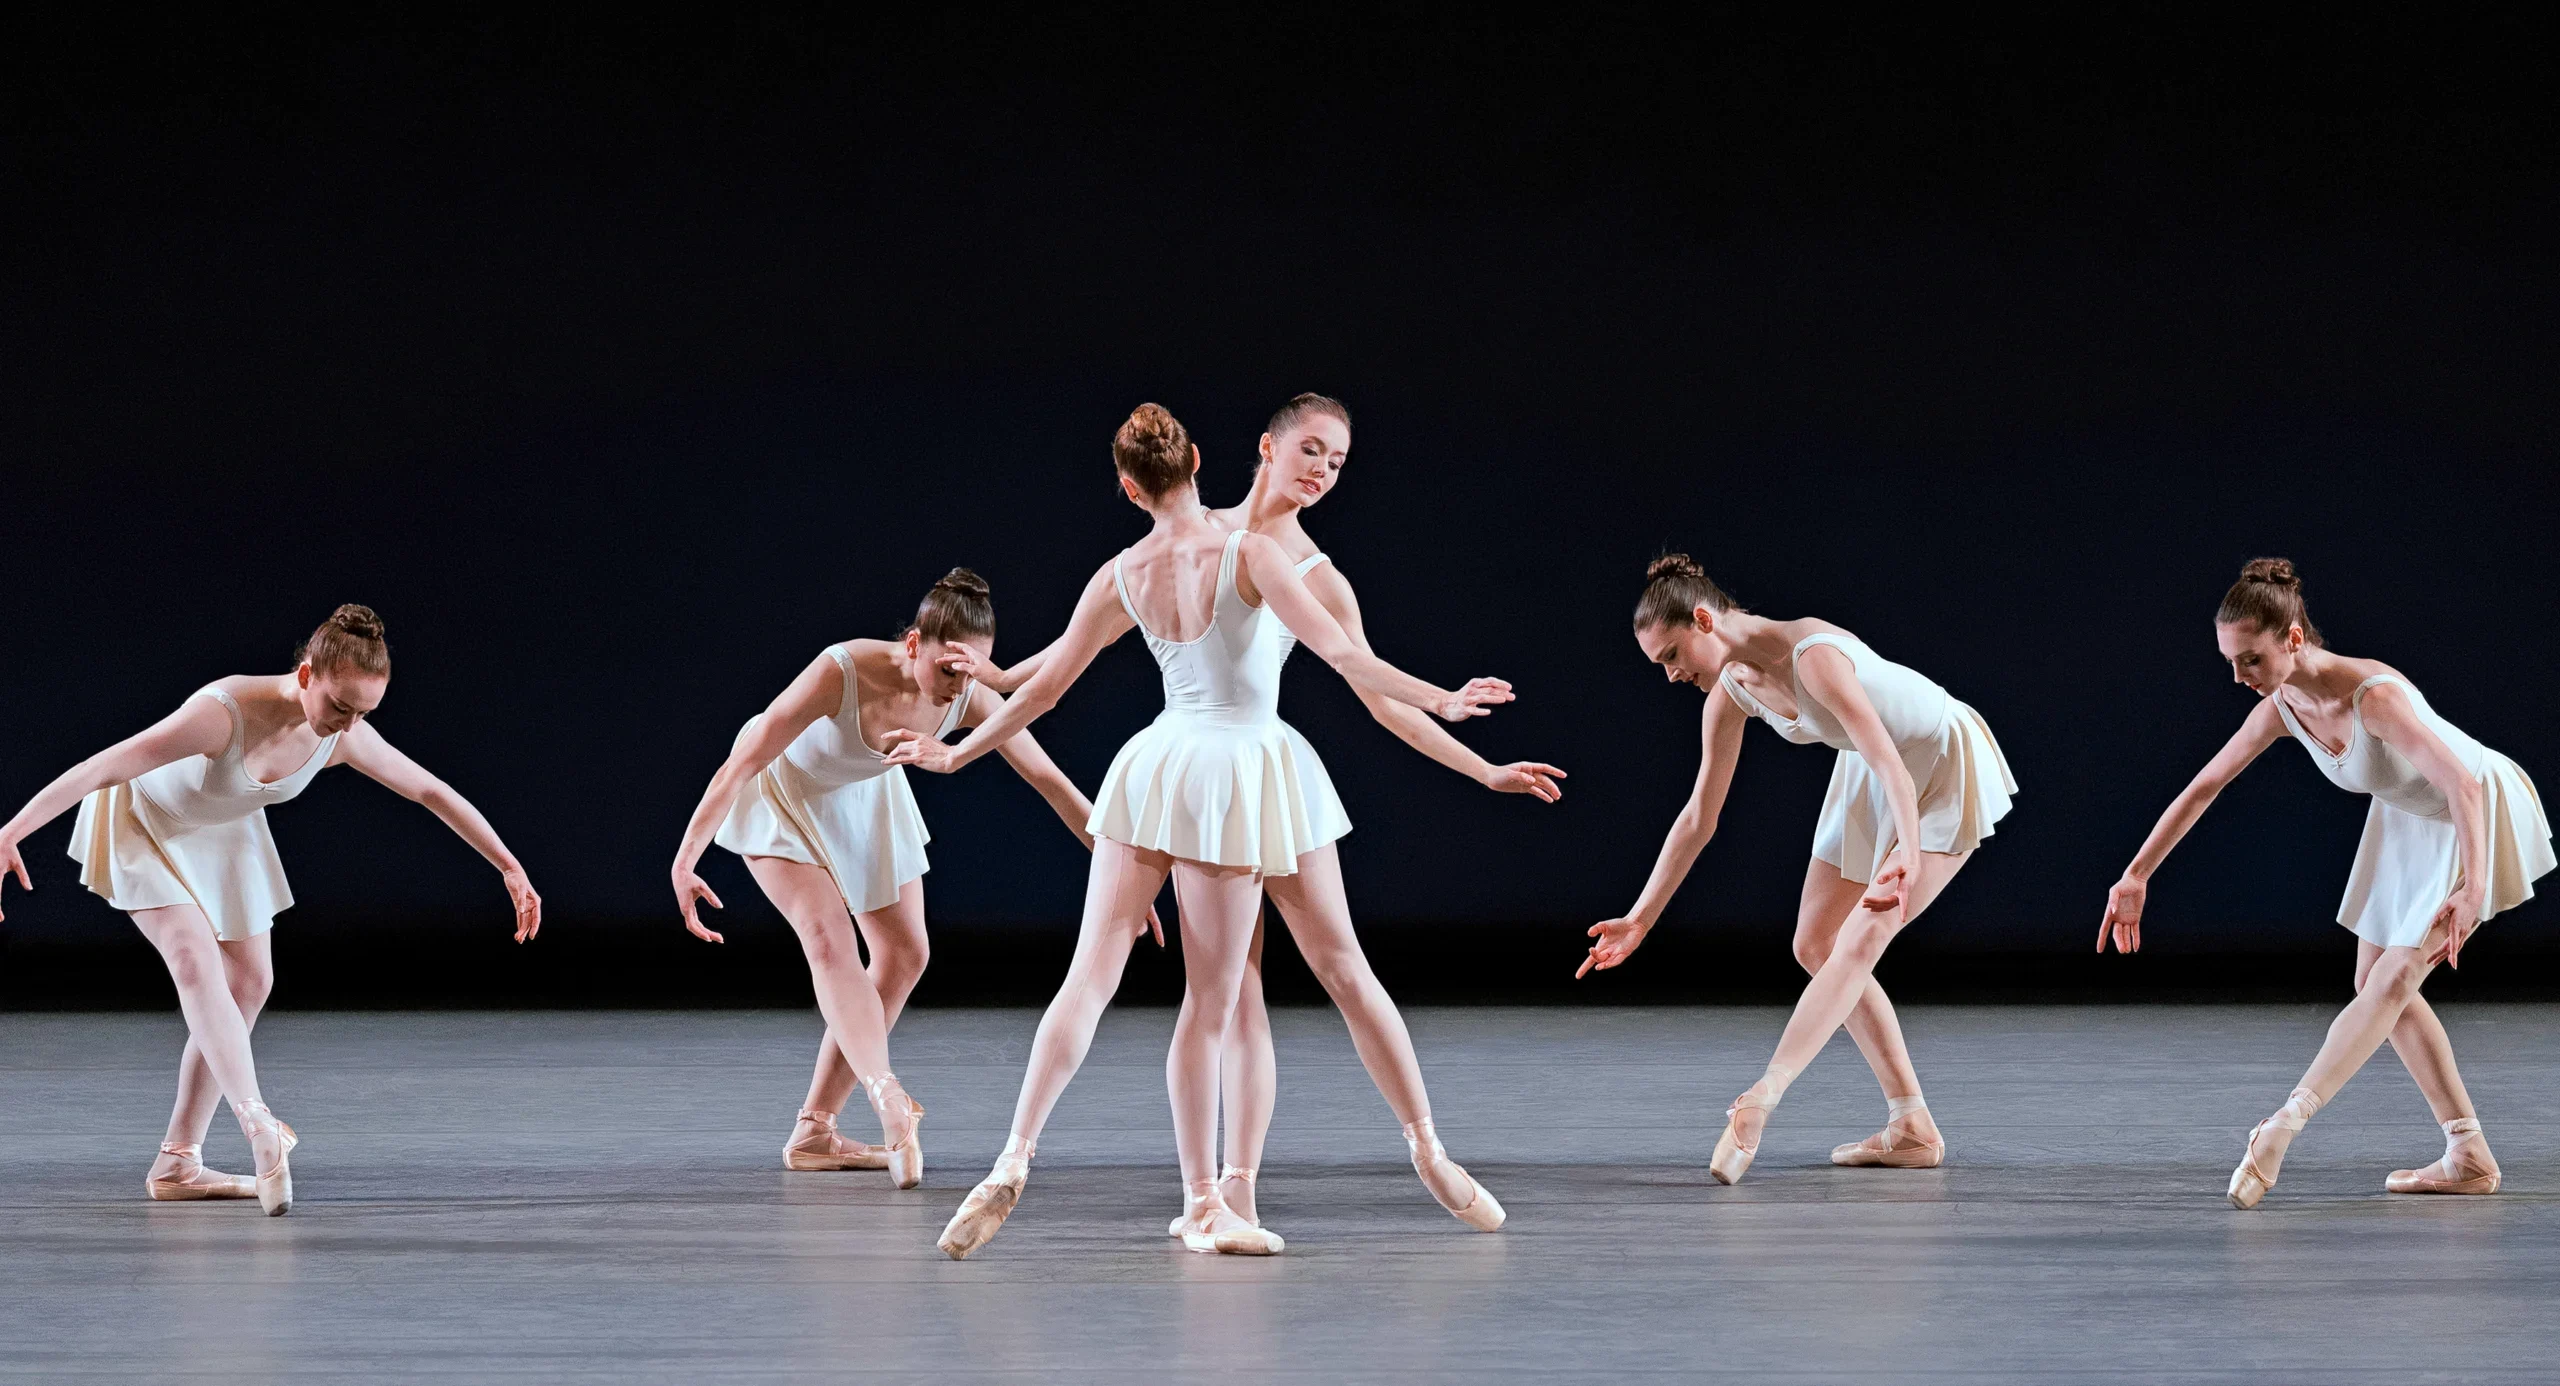 Unity Phelan and Ashley Laracey perform the soloist roles in "Concerto Barocco" onstage. A female corps de ballet dances in a line behind them. All the dancers wear short white ballet dresses and pointe shoes.